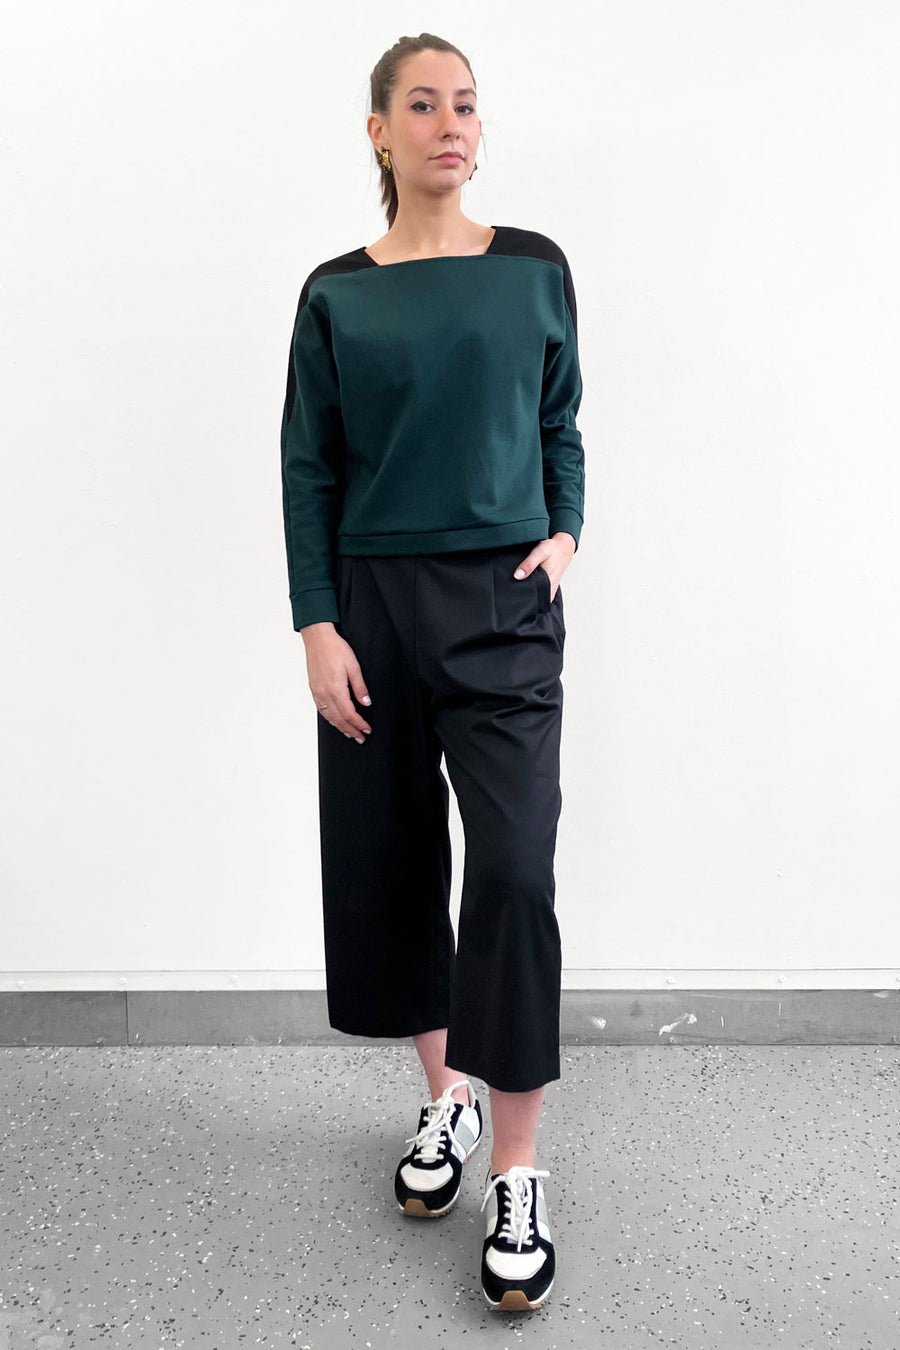 Square Neck Sweater - Green (US 4)